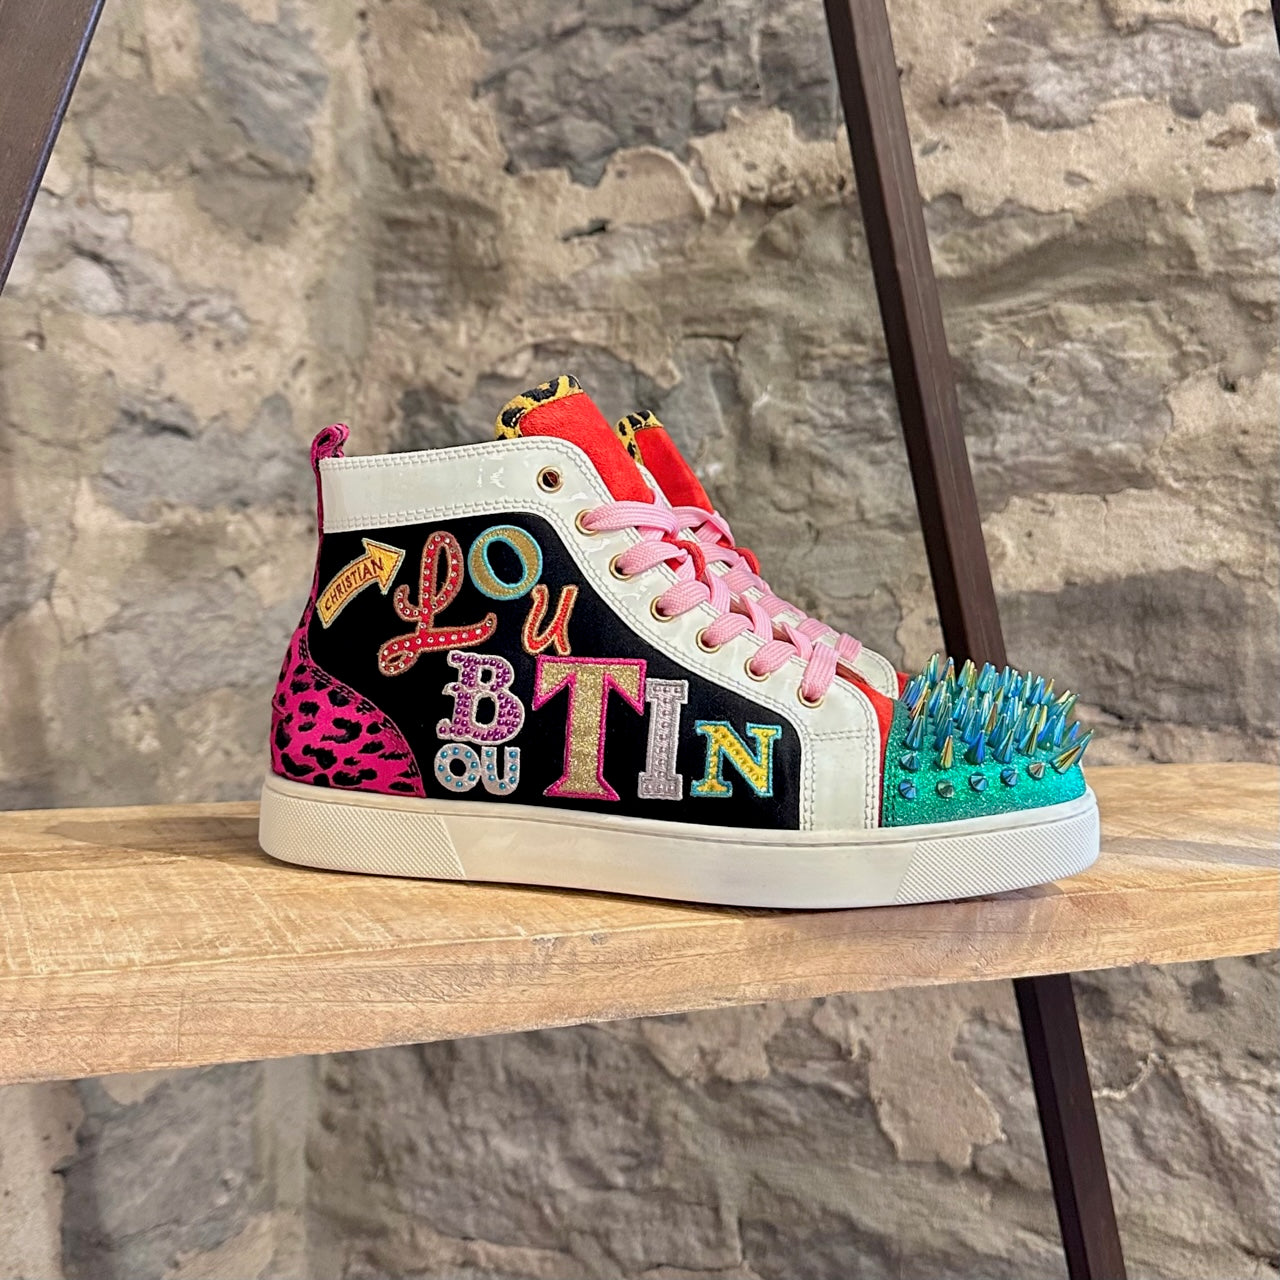 Christian Louboutin Multicolor Leather Lou Spike High Top Sneakers Size 42  Christian Louboutin